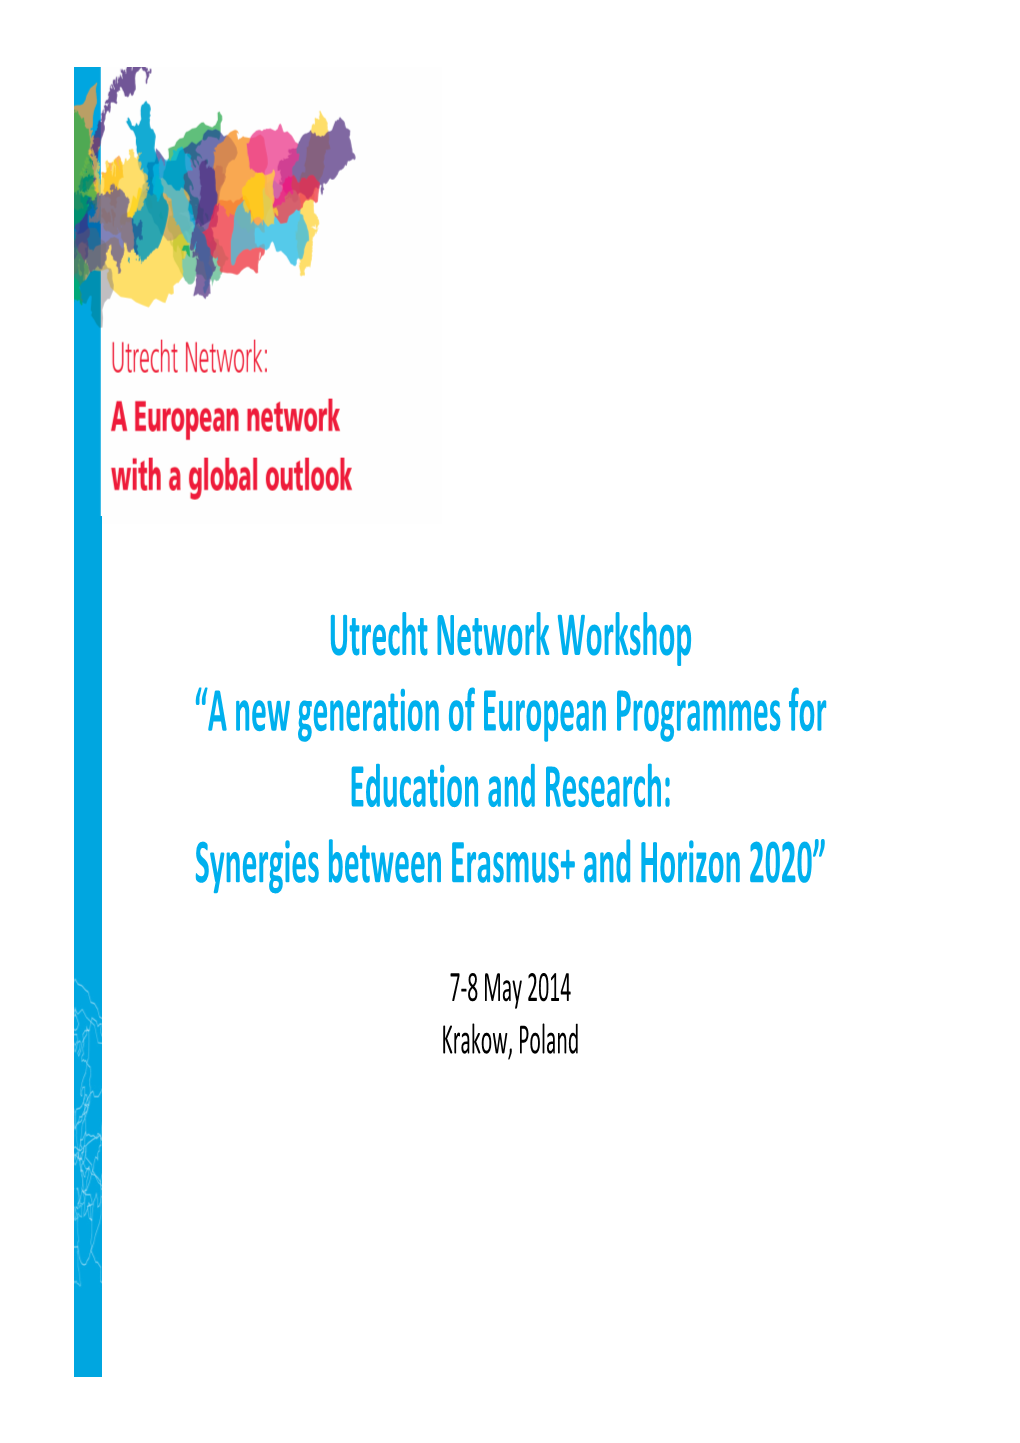 Utrecht Network Workshop “A New Generation of European Programmes for Education and Research: Synergies Between Erasmus+ and Horizon 2020”